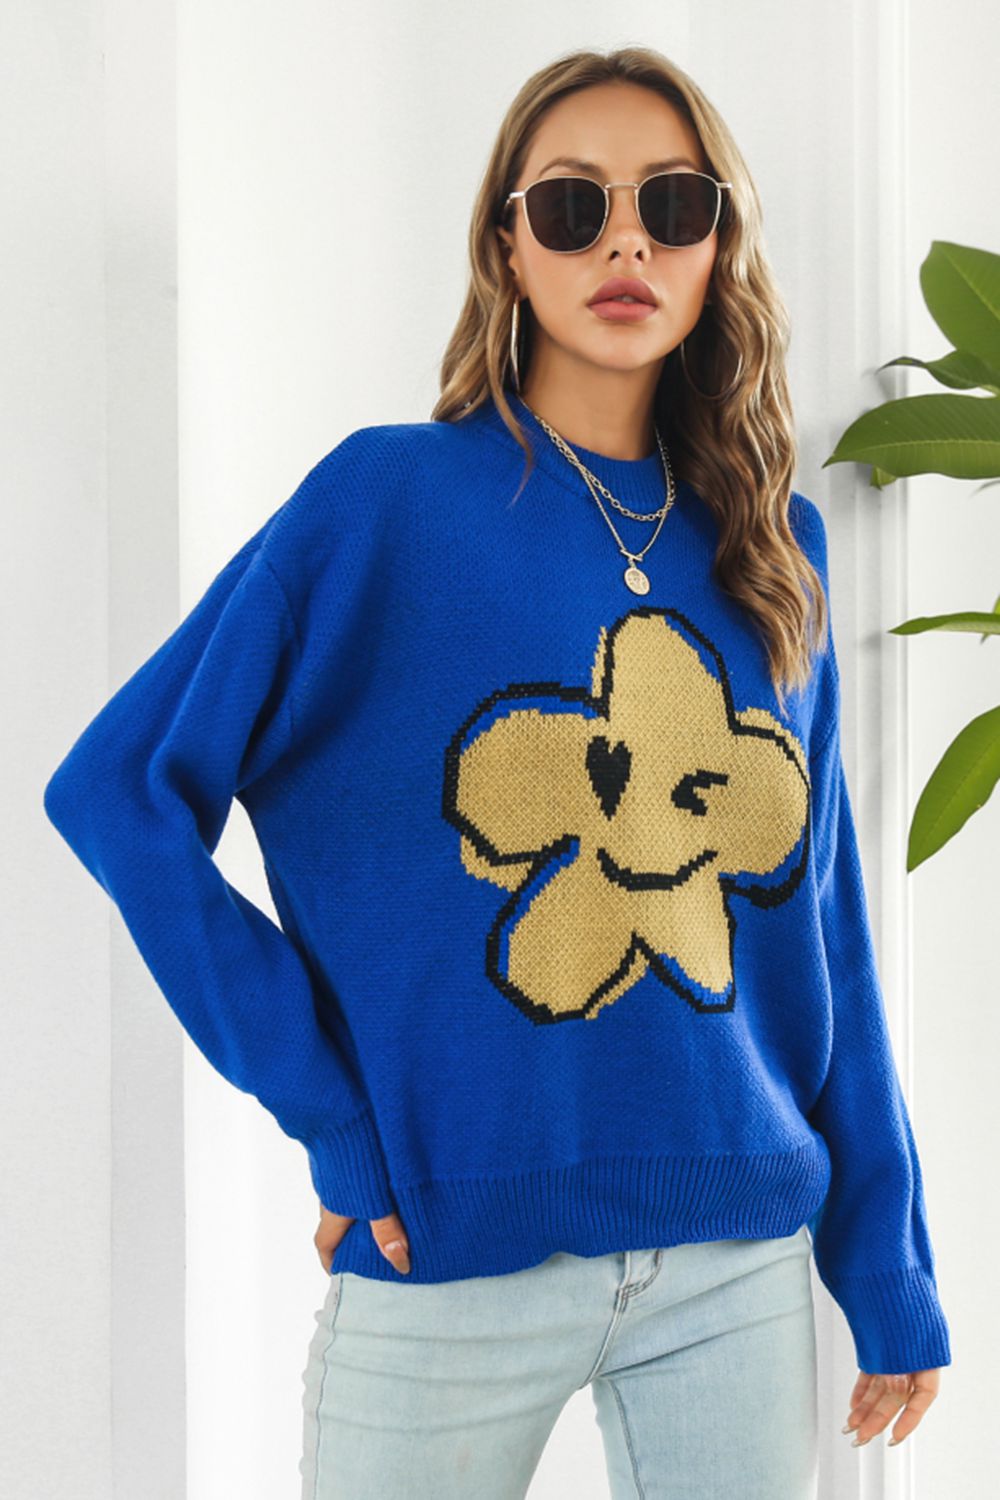 Smiley Face Abstract Flower Bold Color Knit Pullover Long Sleeve Sweater Shirt